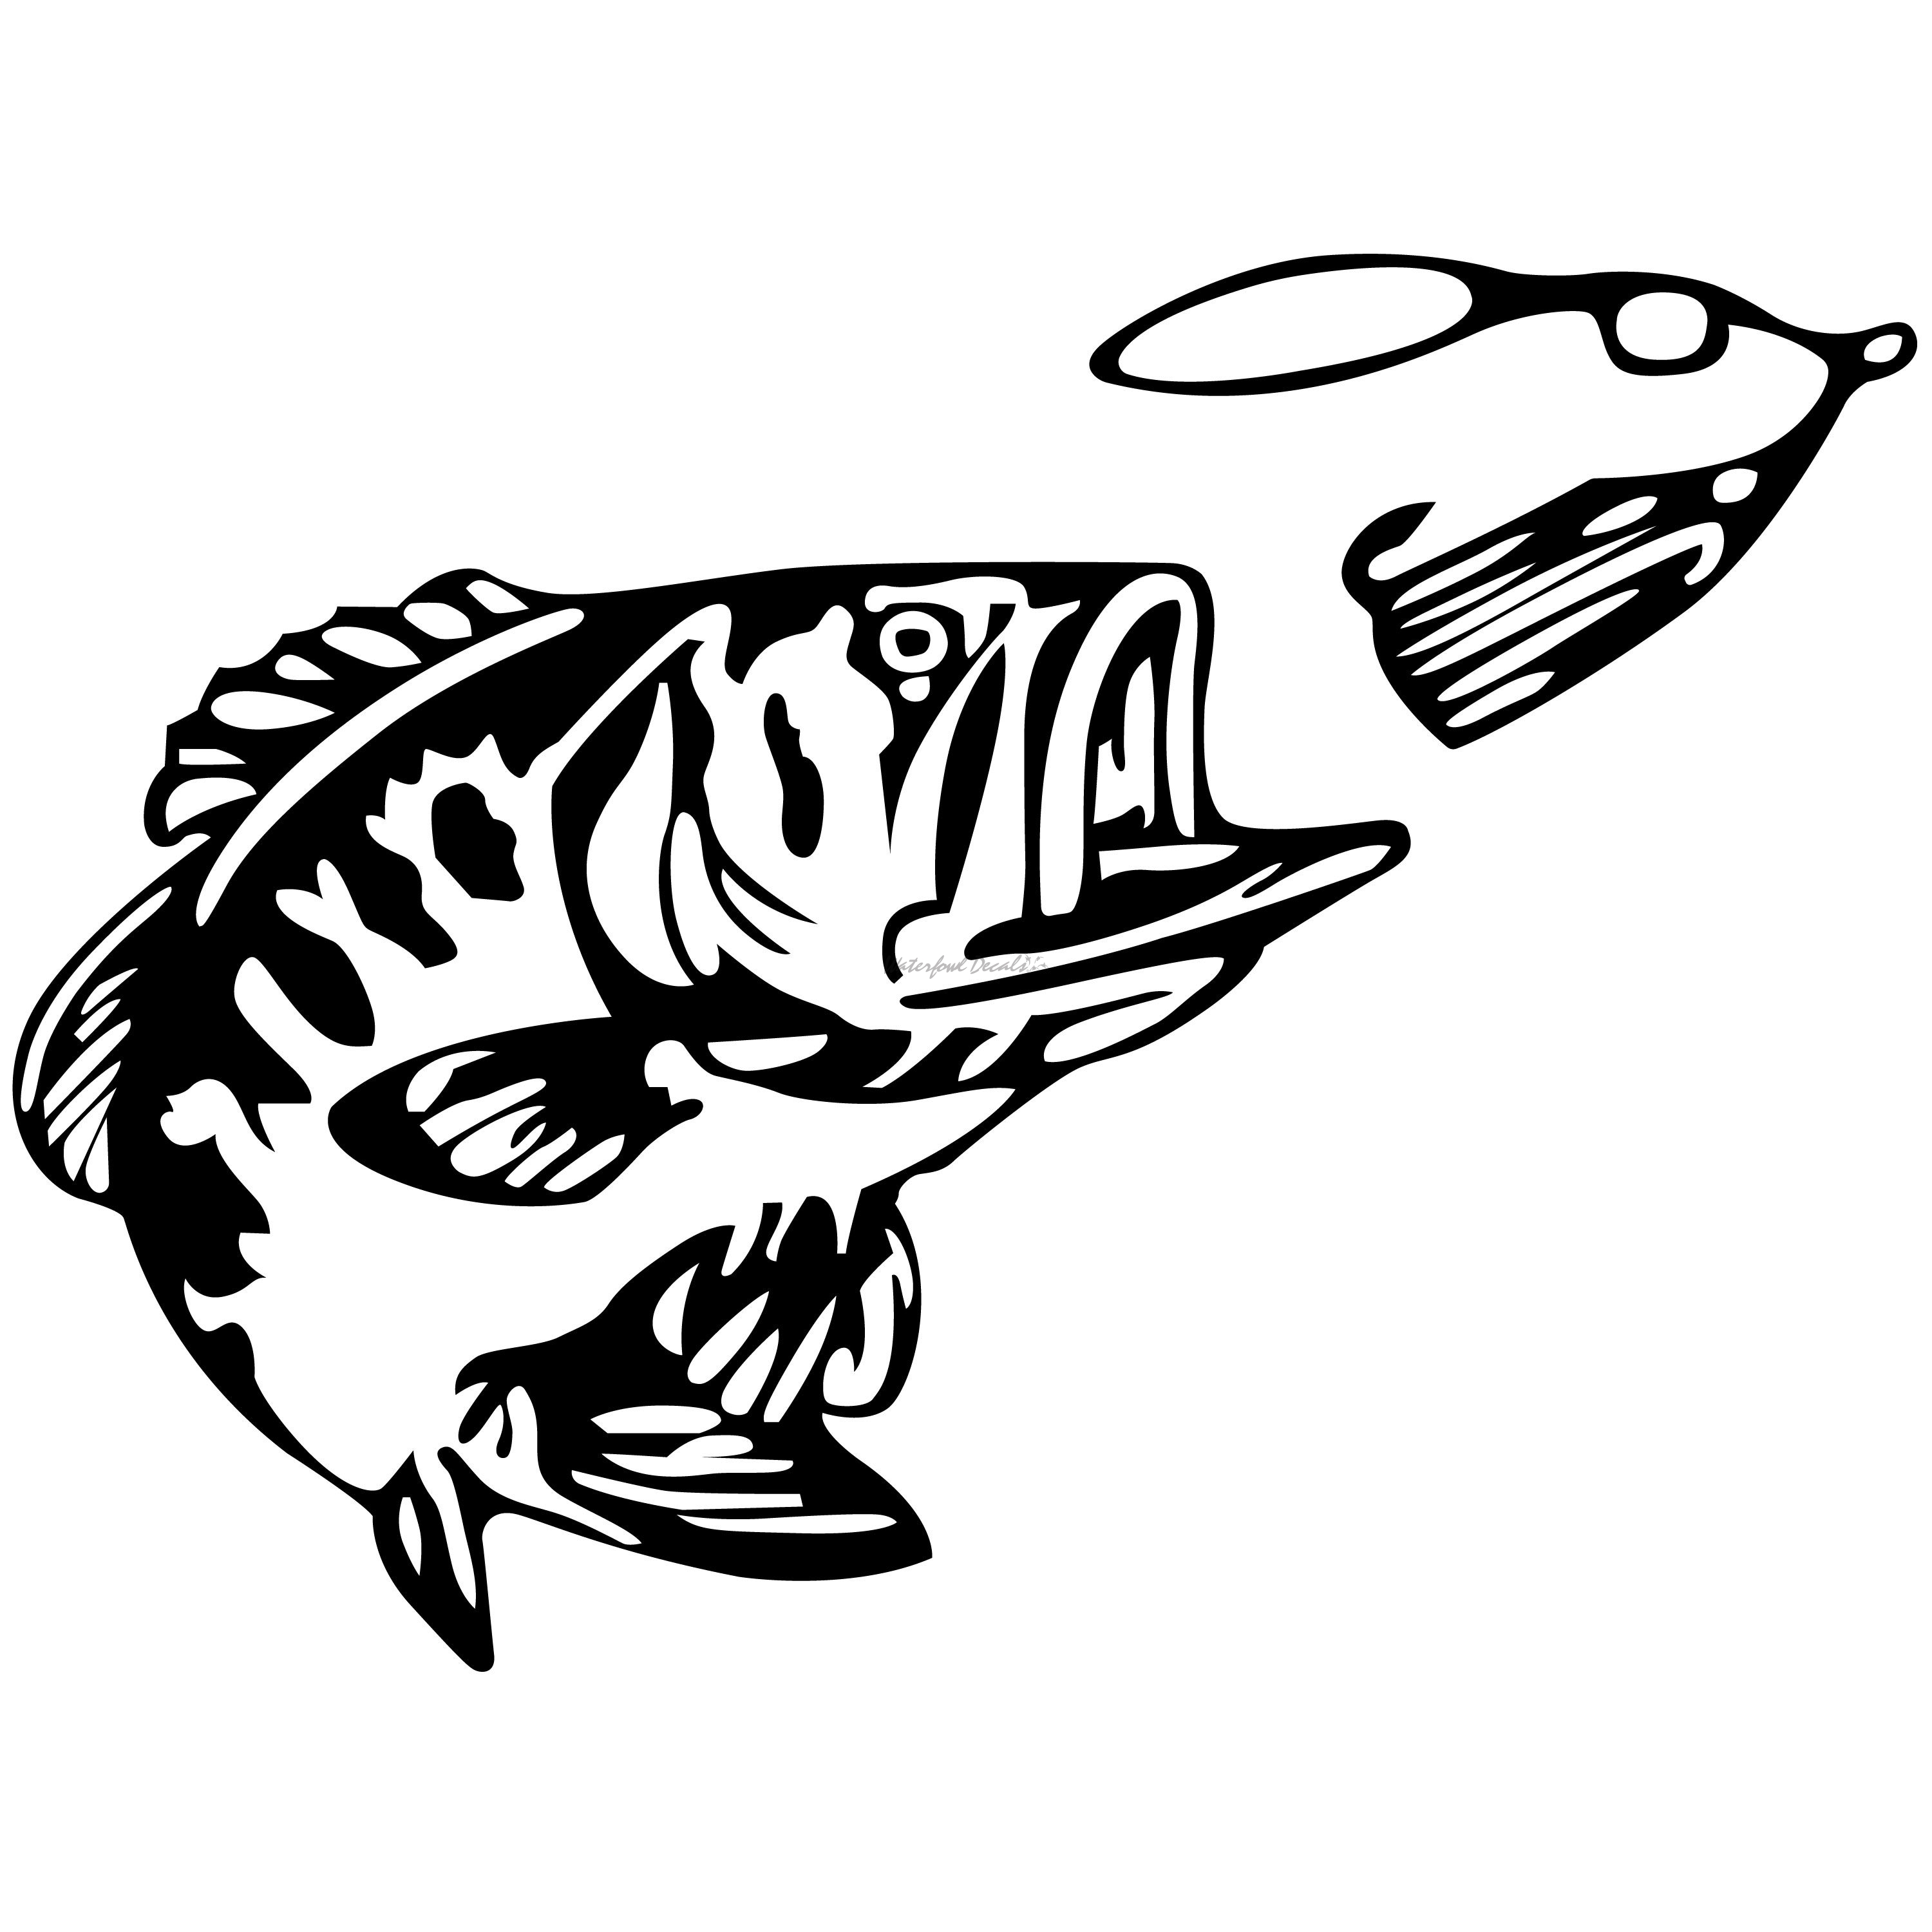 Download Bass and Spinner Decal - Bass Fishing Sticker - 1255 - Waterfowldecals